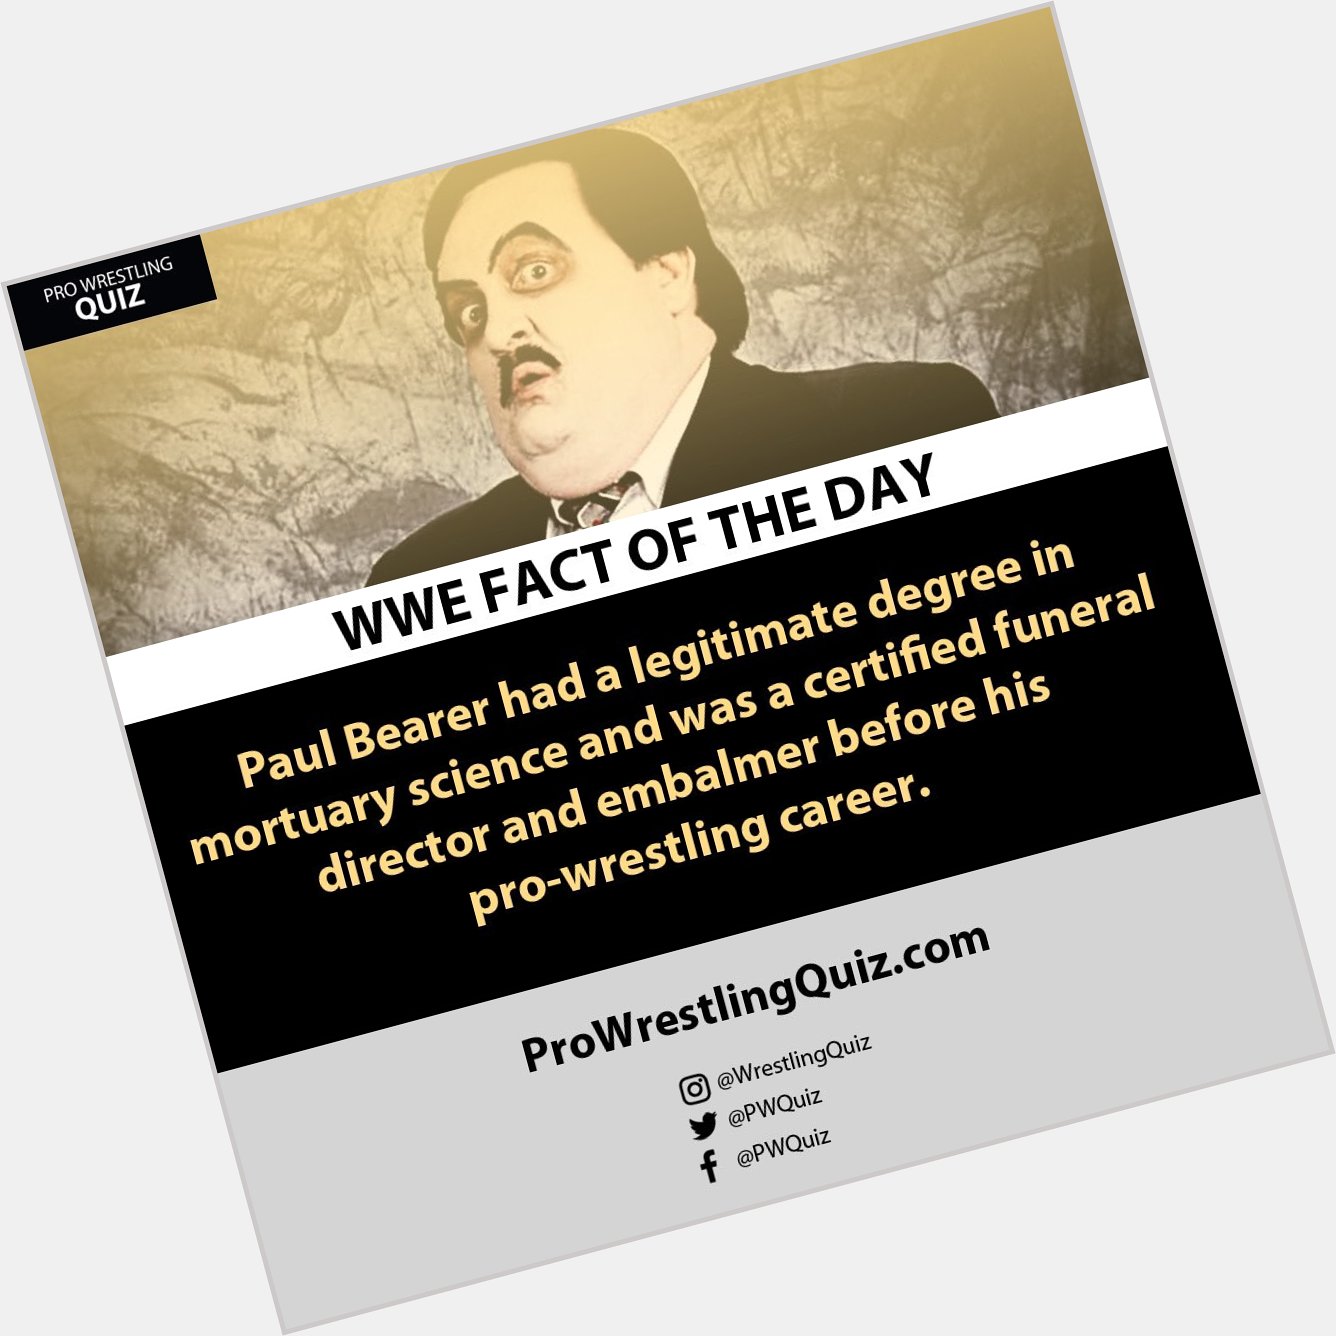 Happy Birthday to Paul Bearer, who would have turned 66 years old today.  